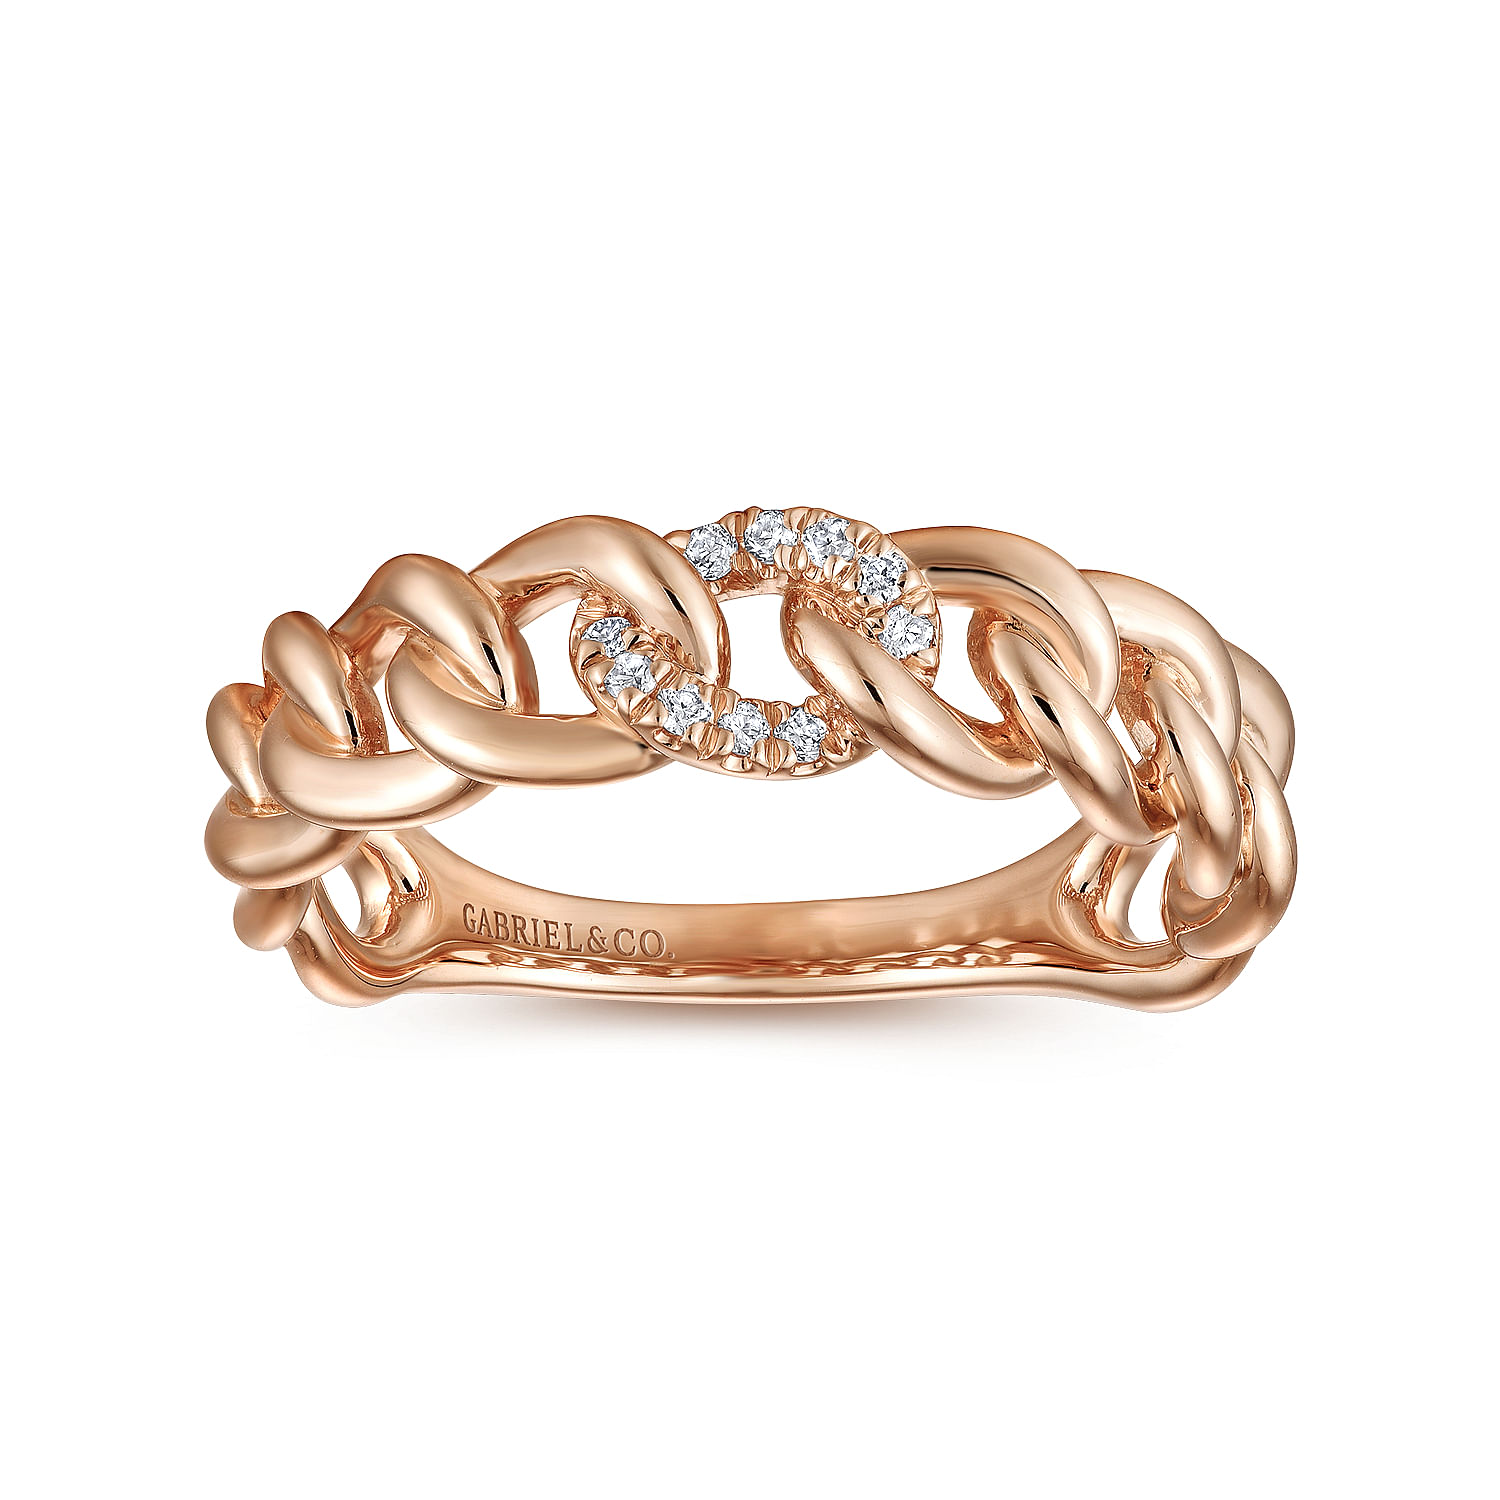 14K Rose Gold Chain Link Ring Band with Pavé Diamond Station